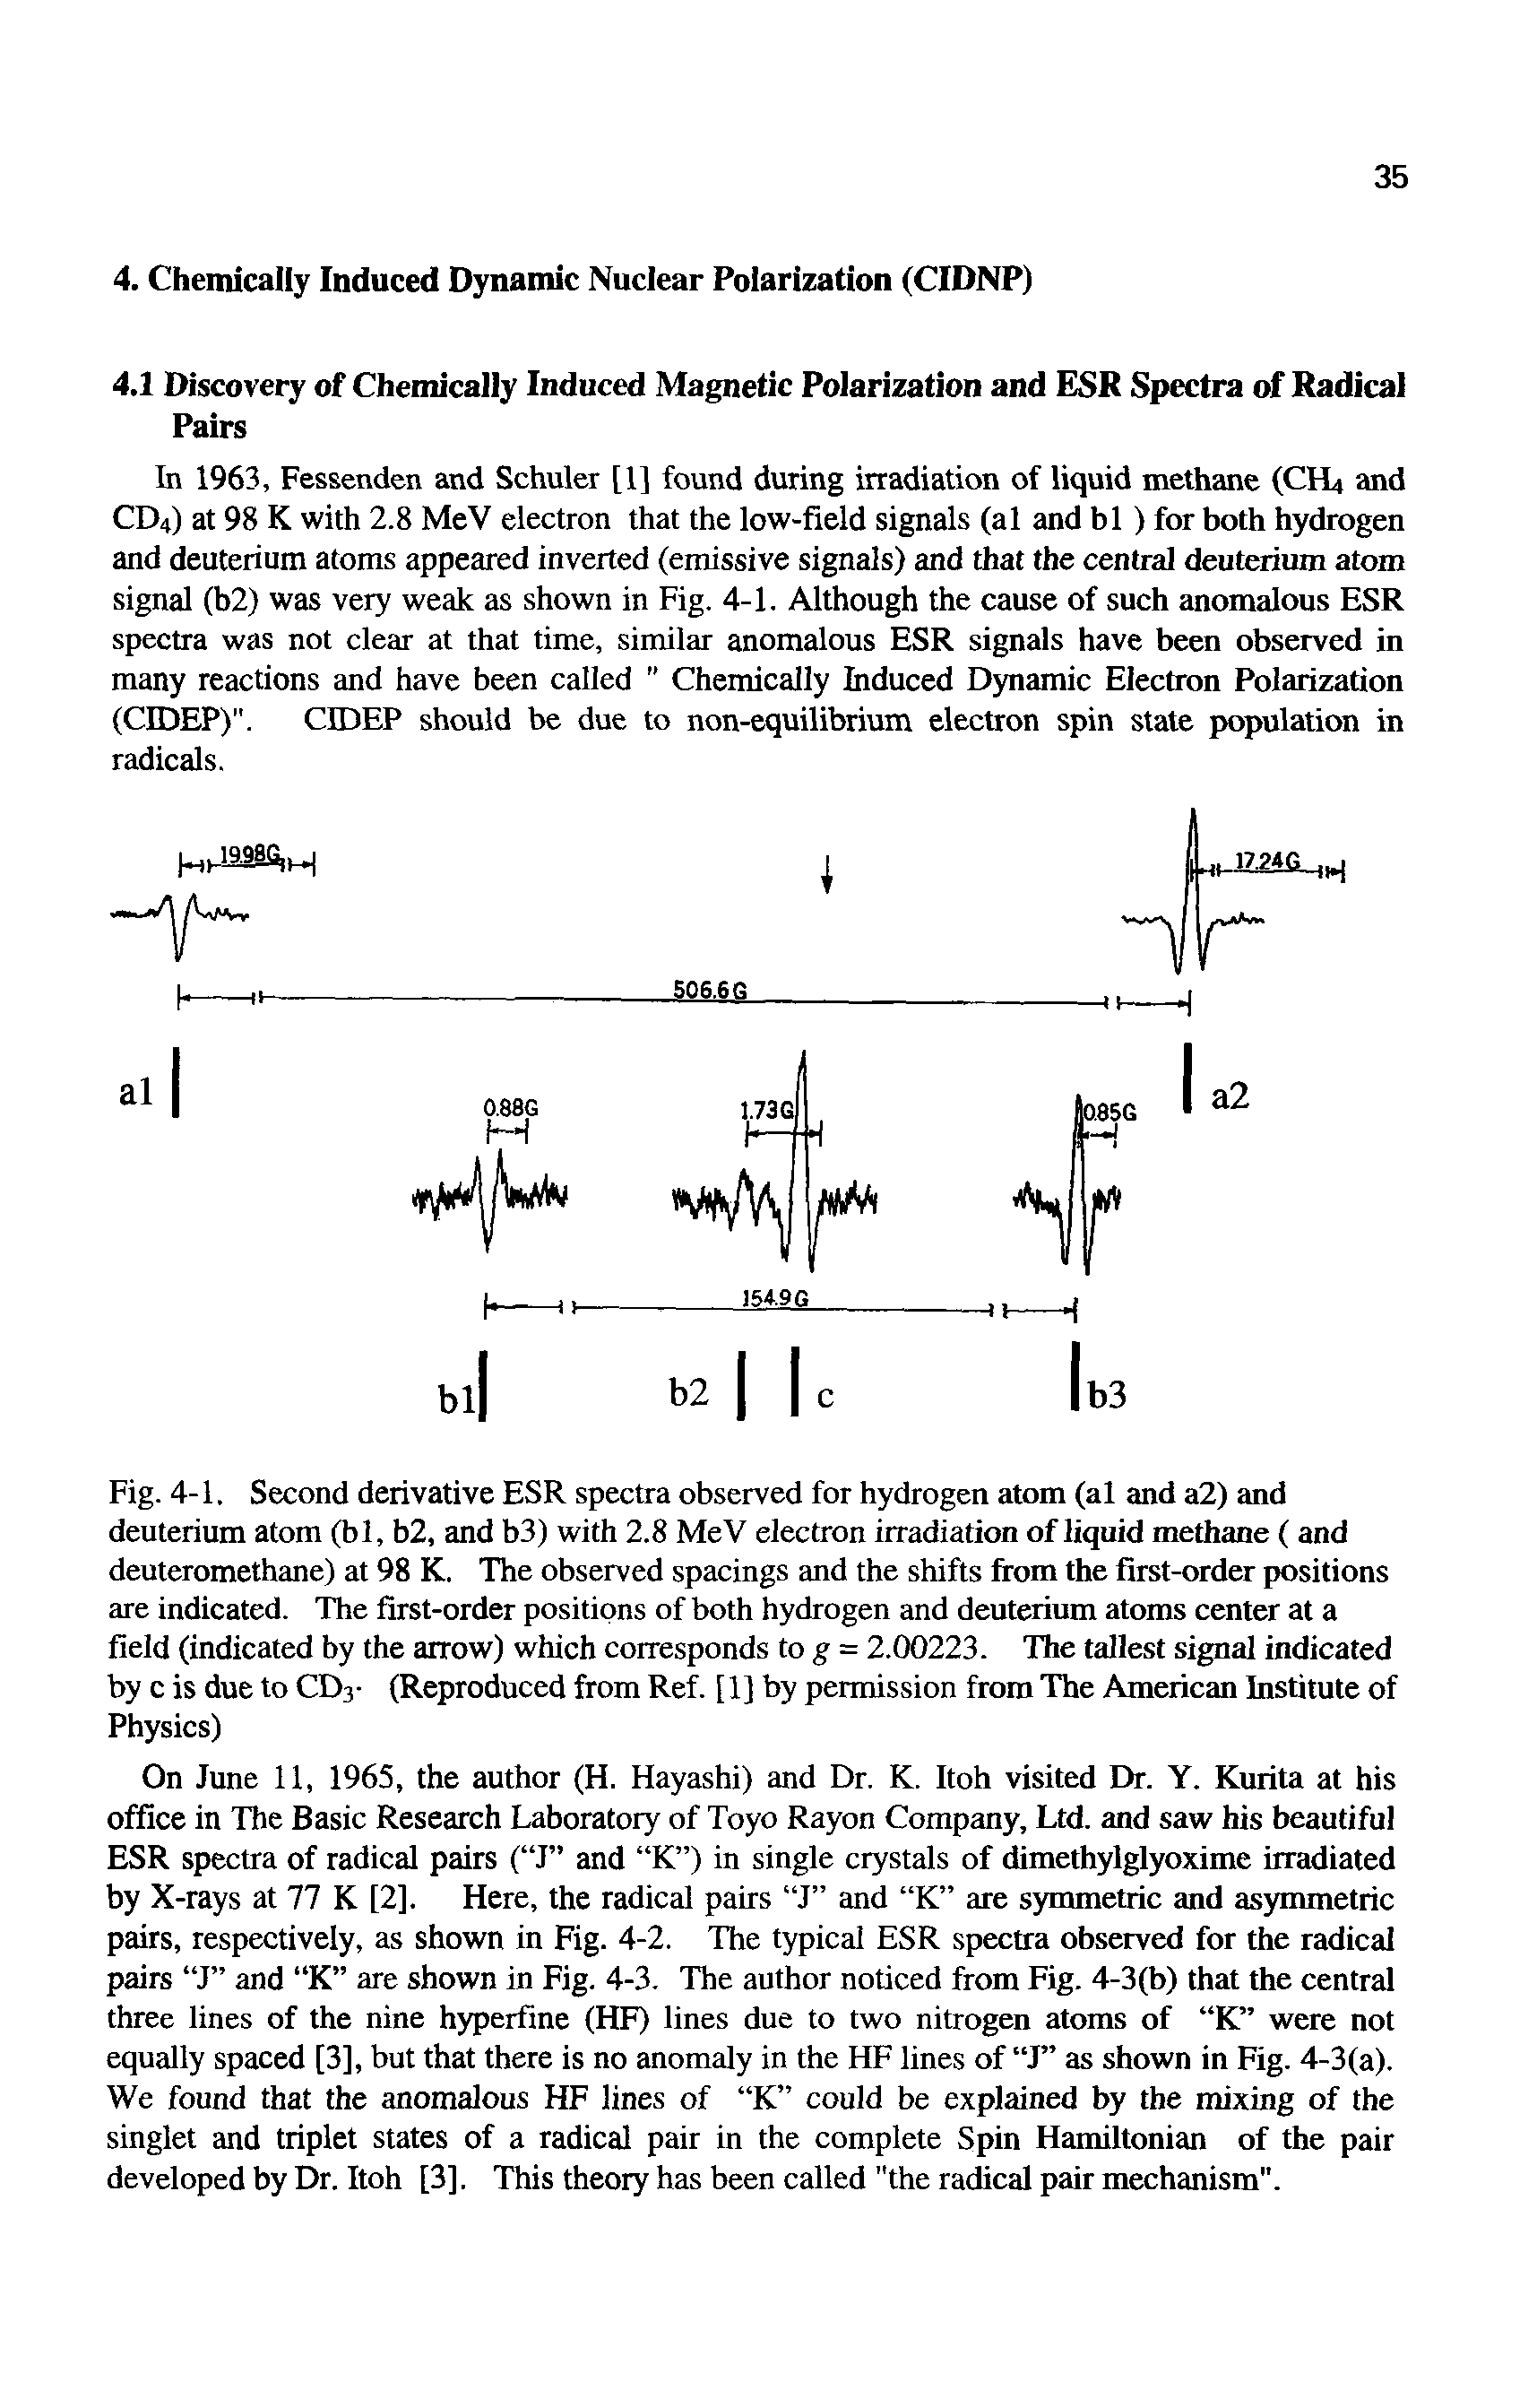 Fig. 4-1. Second derivative ESR spectra observed for hydrogen atom (al and a2) and deuterium atom (bl, b2, and b3) with 2.8 MeV electron irradiation of liquid methane ( and deuteromethane) at 98 K. The observed spacings and the shifts from the first-order positions are indicated. The first-order positions of both hydrogen and deuterium atoms center at a field (indicated by the arrow) which corresponds to g = 2.00223. The tallest signal indicated by c is due to CDa- (Reproduced from Ref. [ 1] by permission from The American Institute of Physics)...